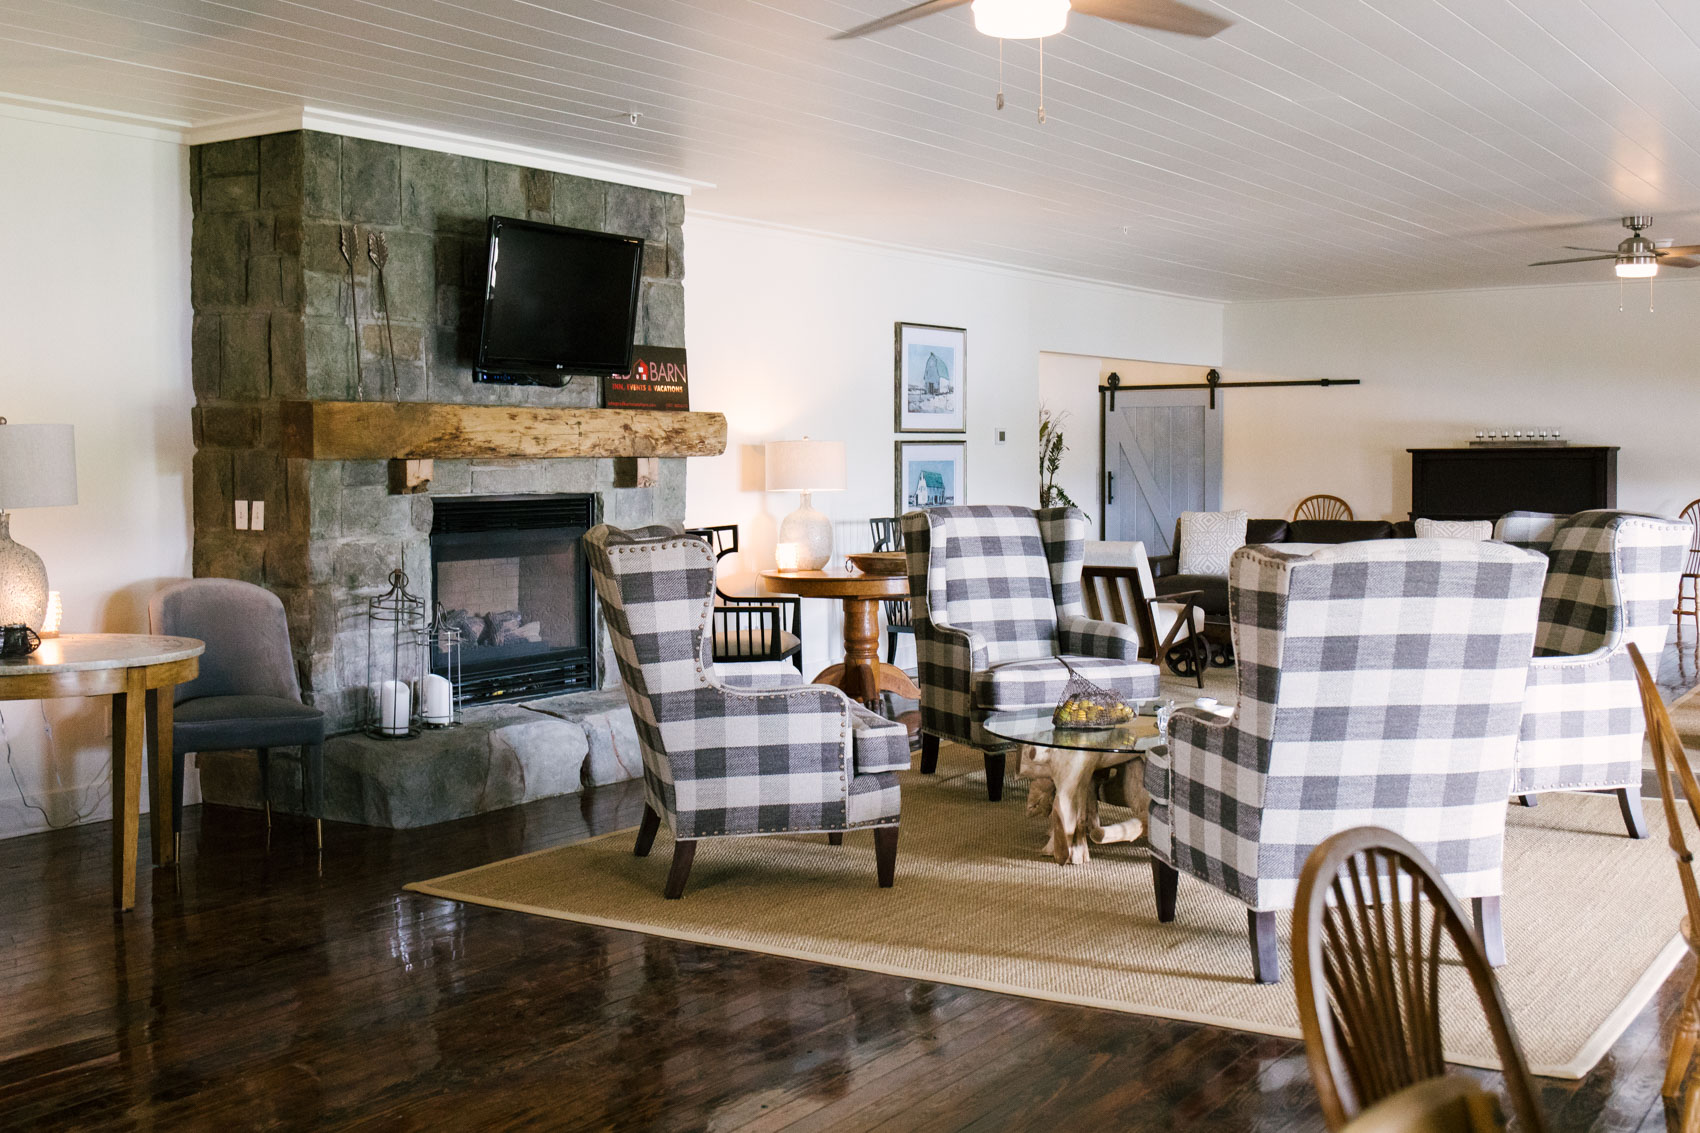 rustic and modern decor at the Red Barn Inn | The Best Place to Stay in Deep Creek Maryland 